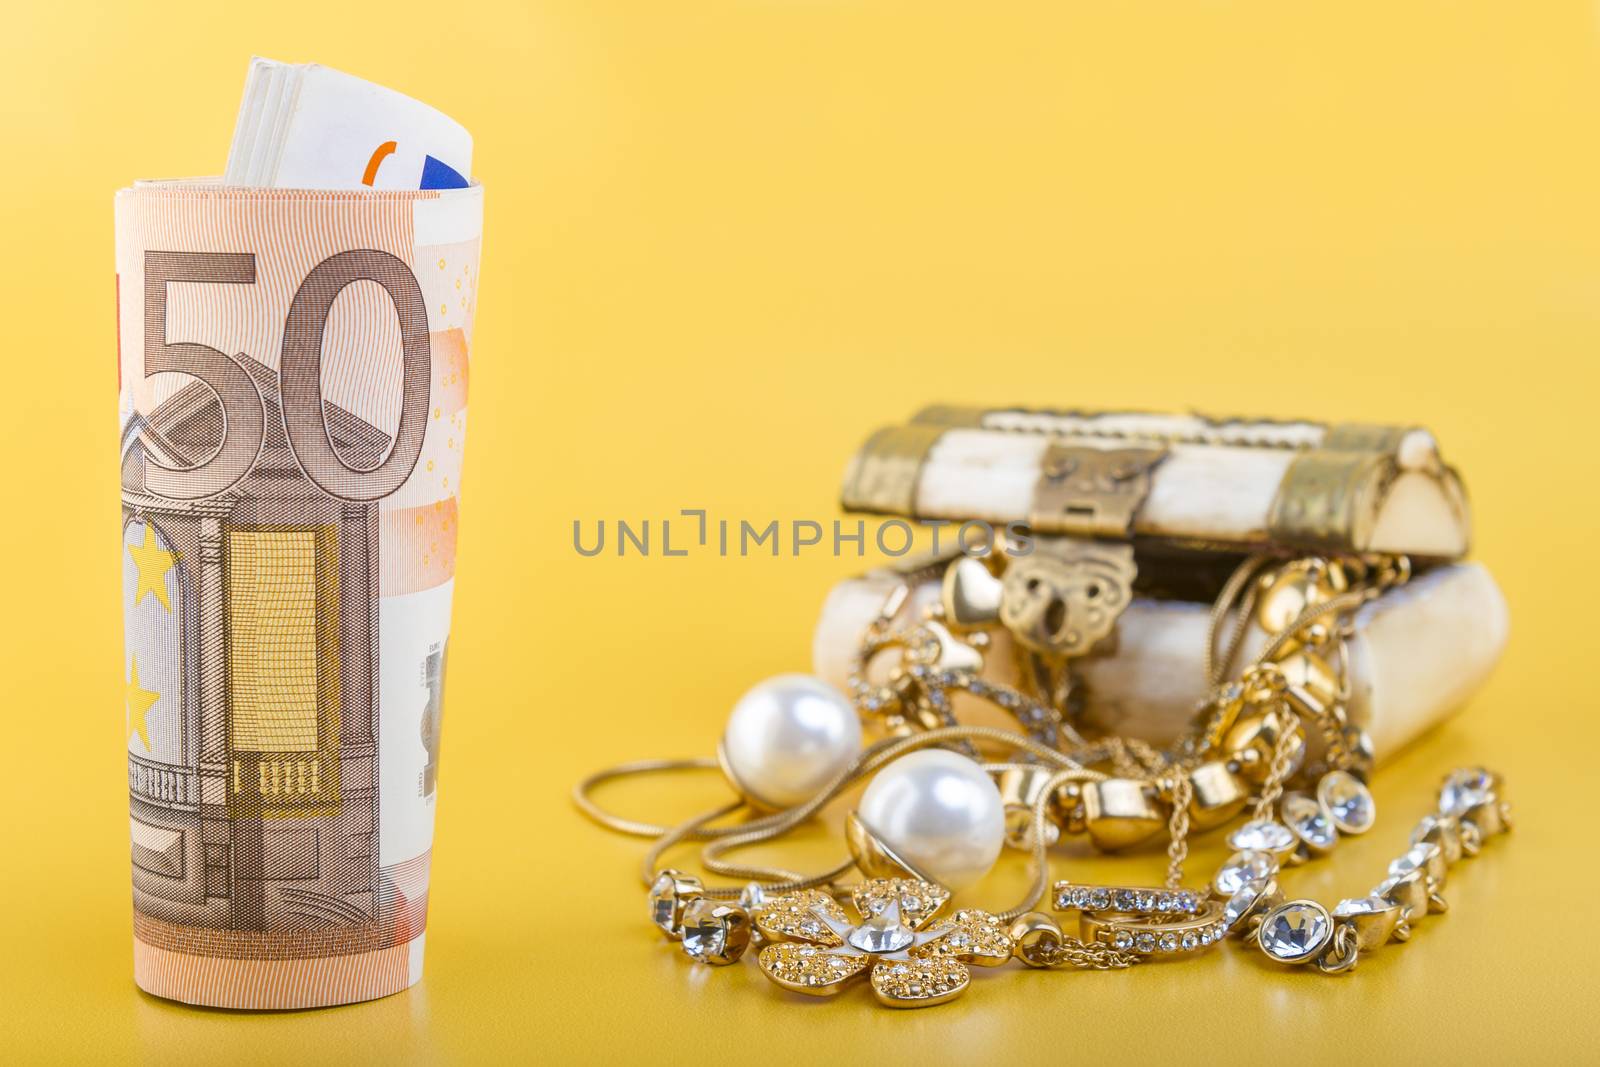 Cash for Gold Jewlery Concept - Concept or Metaphor for selling old gold jewelry for cash